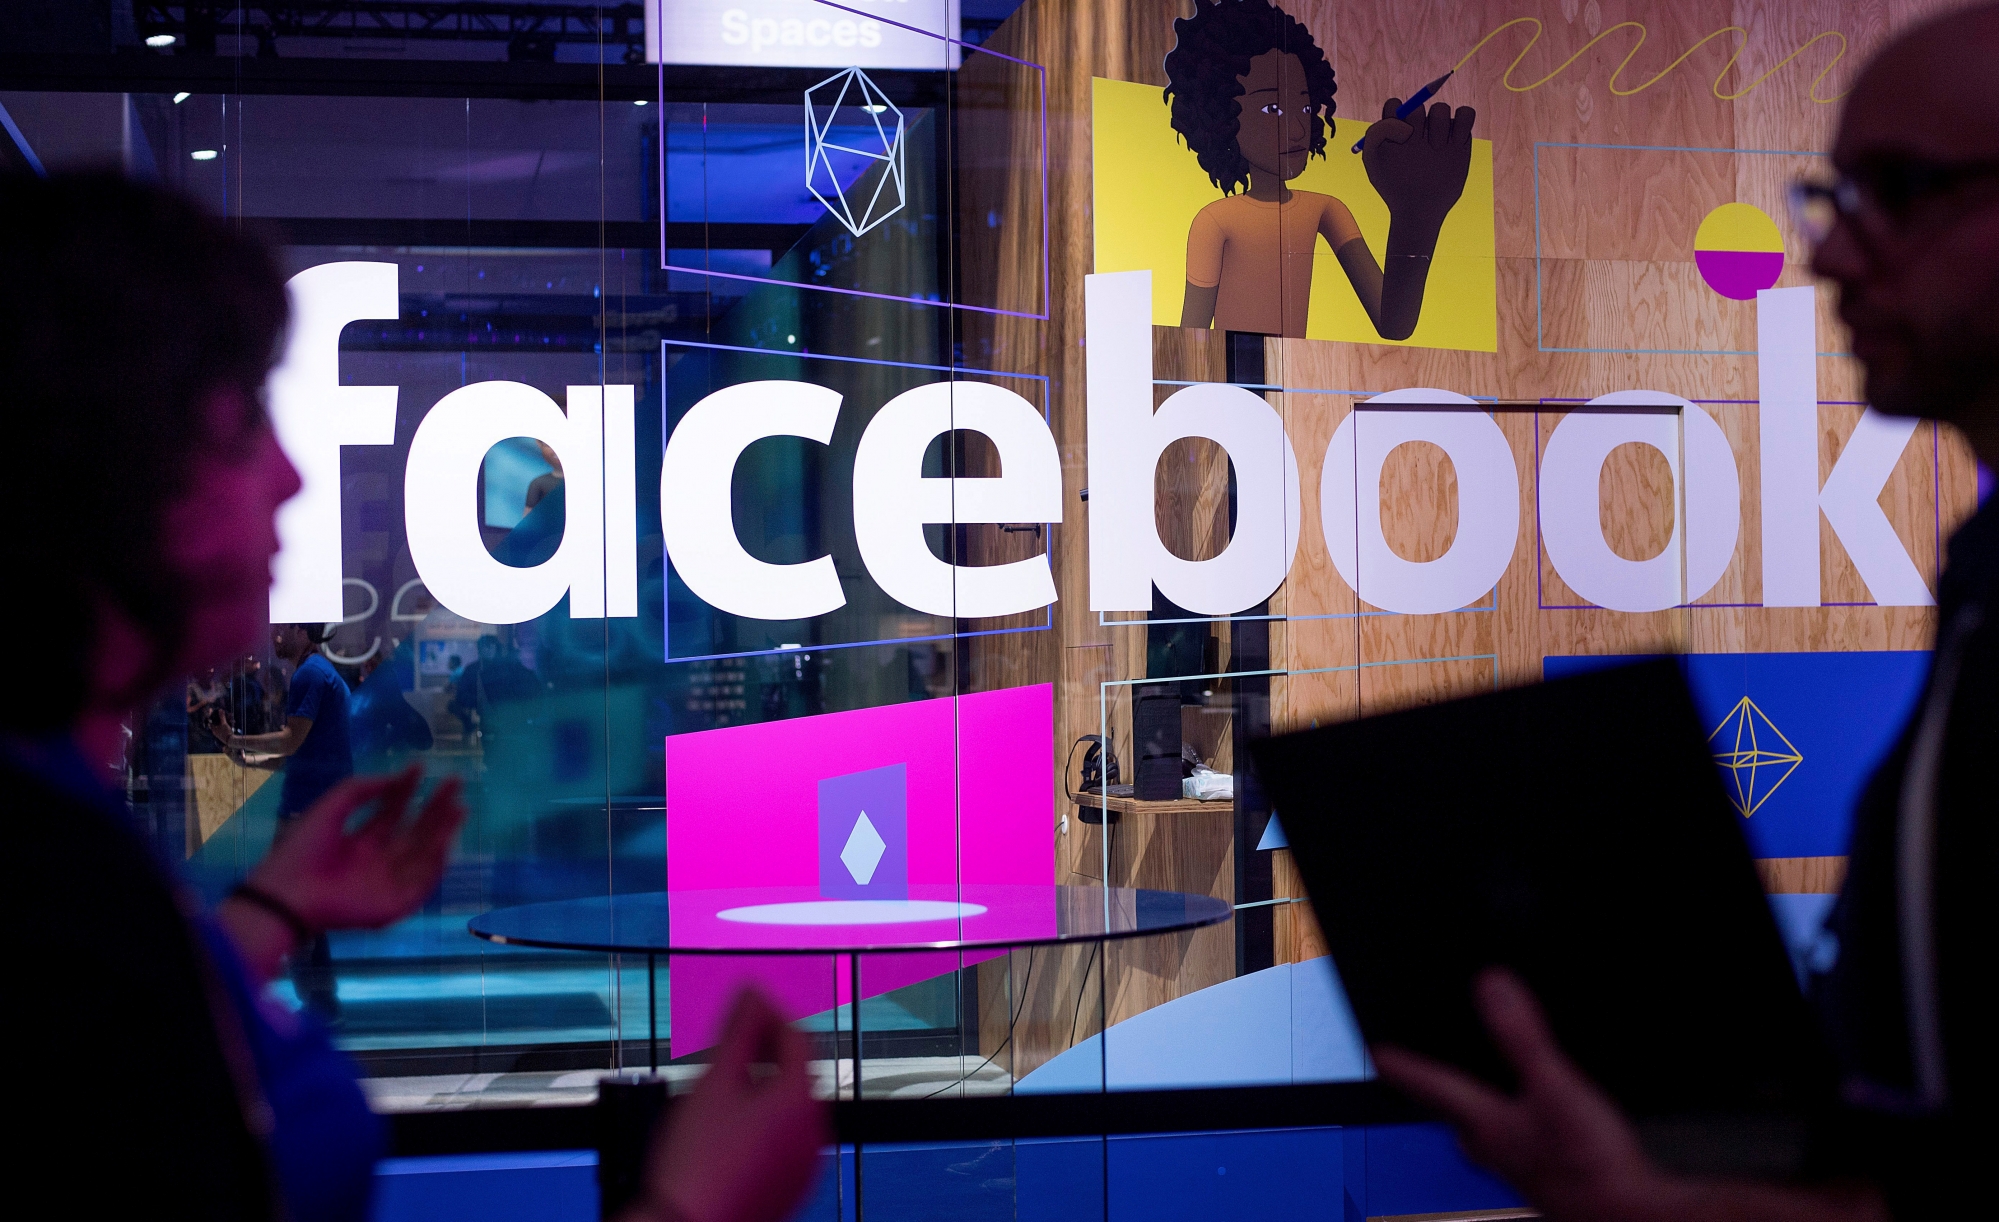 FILE - In this April 18, 2017, file photo, conference workers speak in front of a demo booth at Facebook's annual F8 developer conference in San Jose, Calif. Facebook said Thursday, Jan. 11, 2018, that it is tweaking what people see to make their time on it more Äúmeaningful.Äù The changes come as Facebook faces criticism that social media can make people feel depressed and isolated. (AP Photo/Noah Berger, File) Facebook News Feed Changes